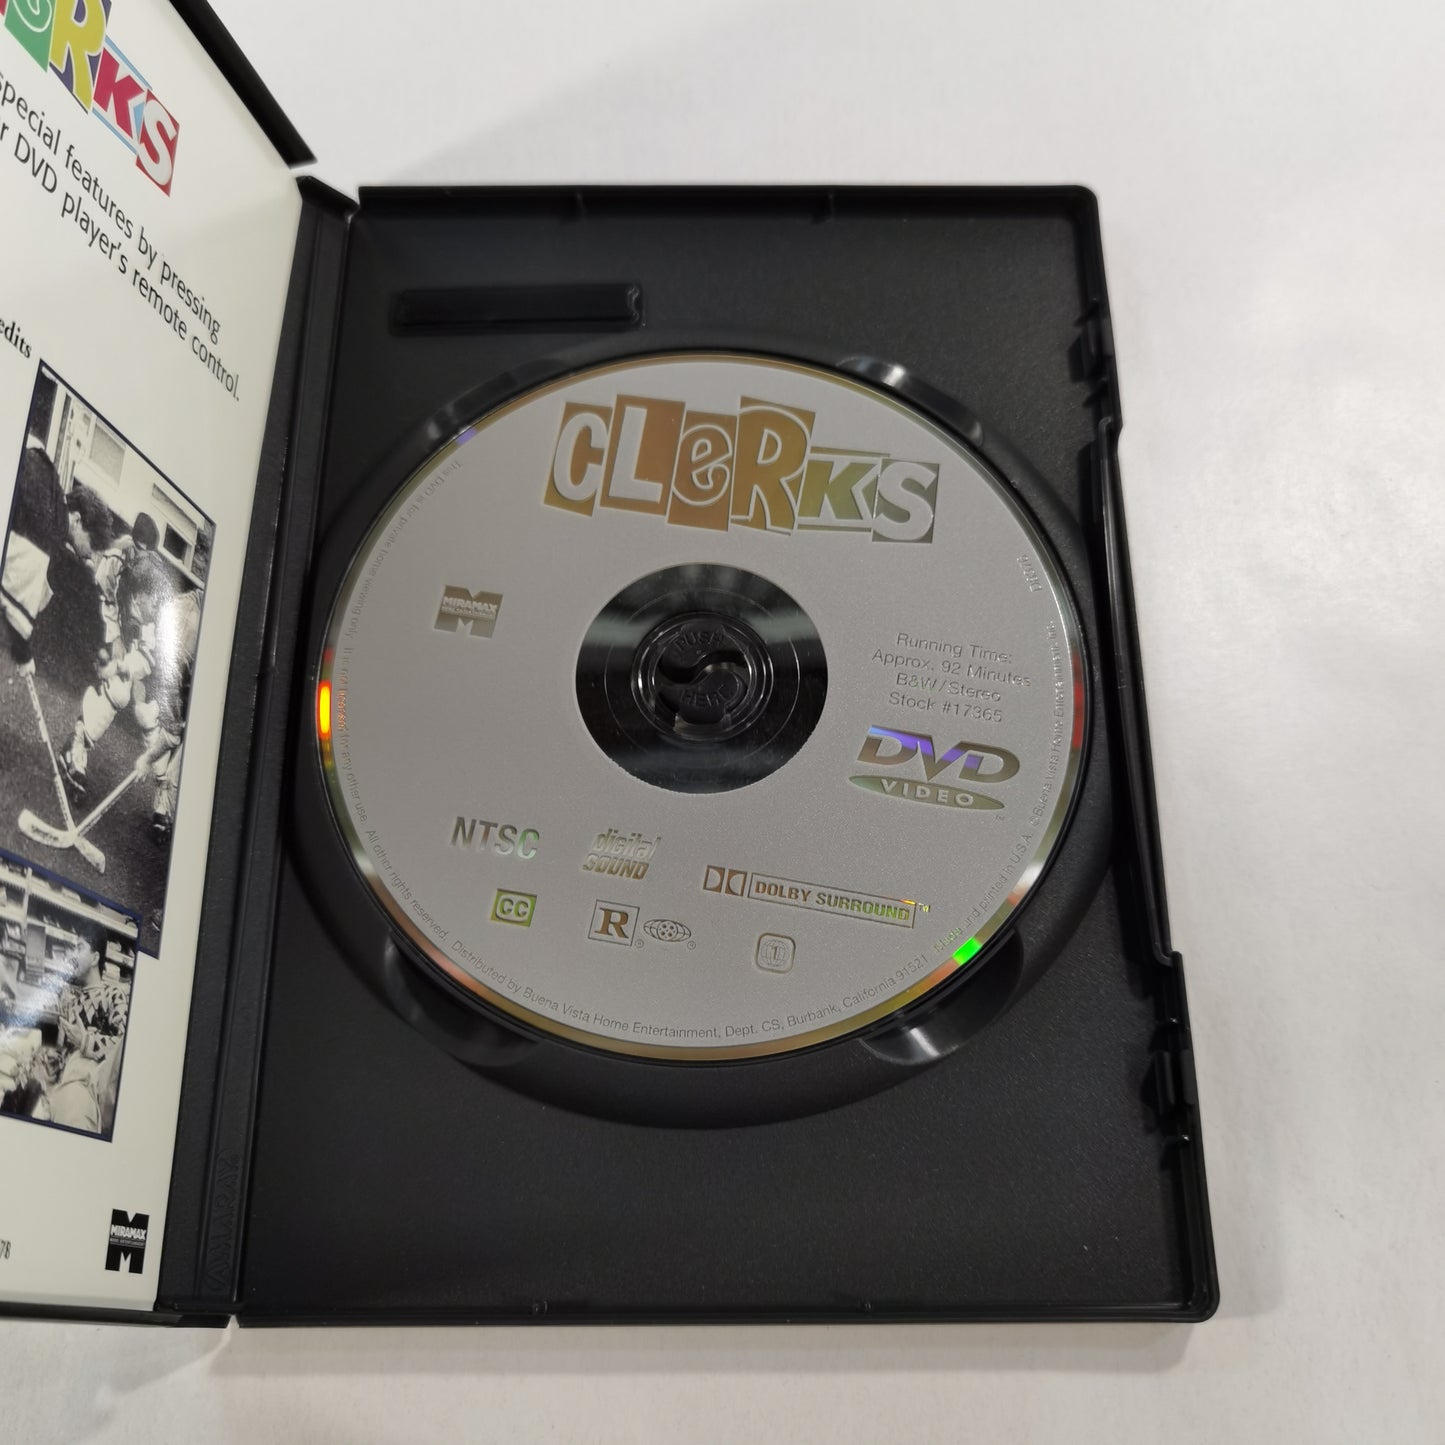 Clerks (1994) - DVD US MirMax Collector's Series